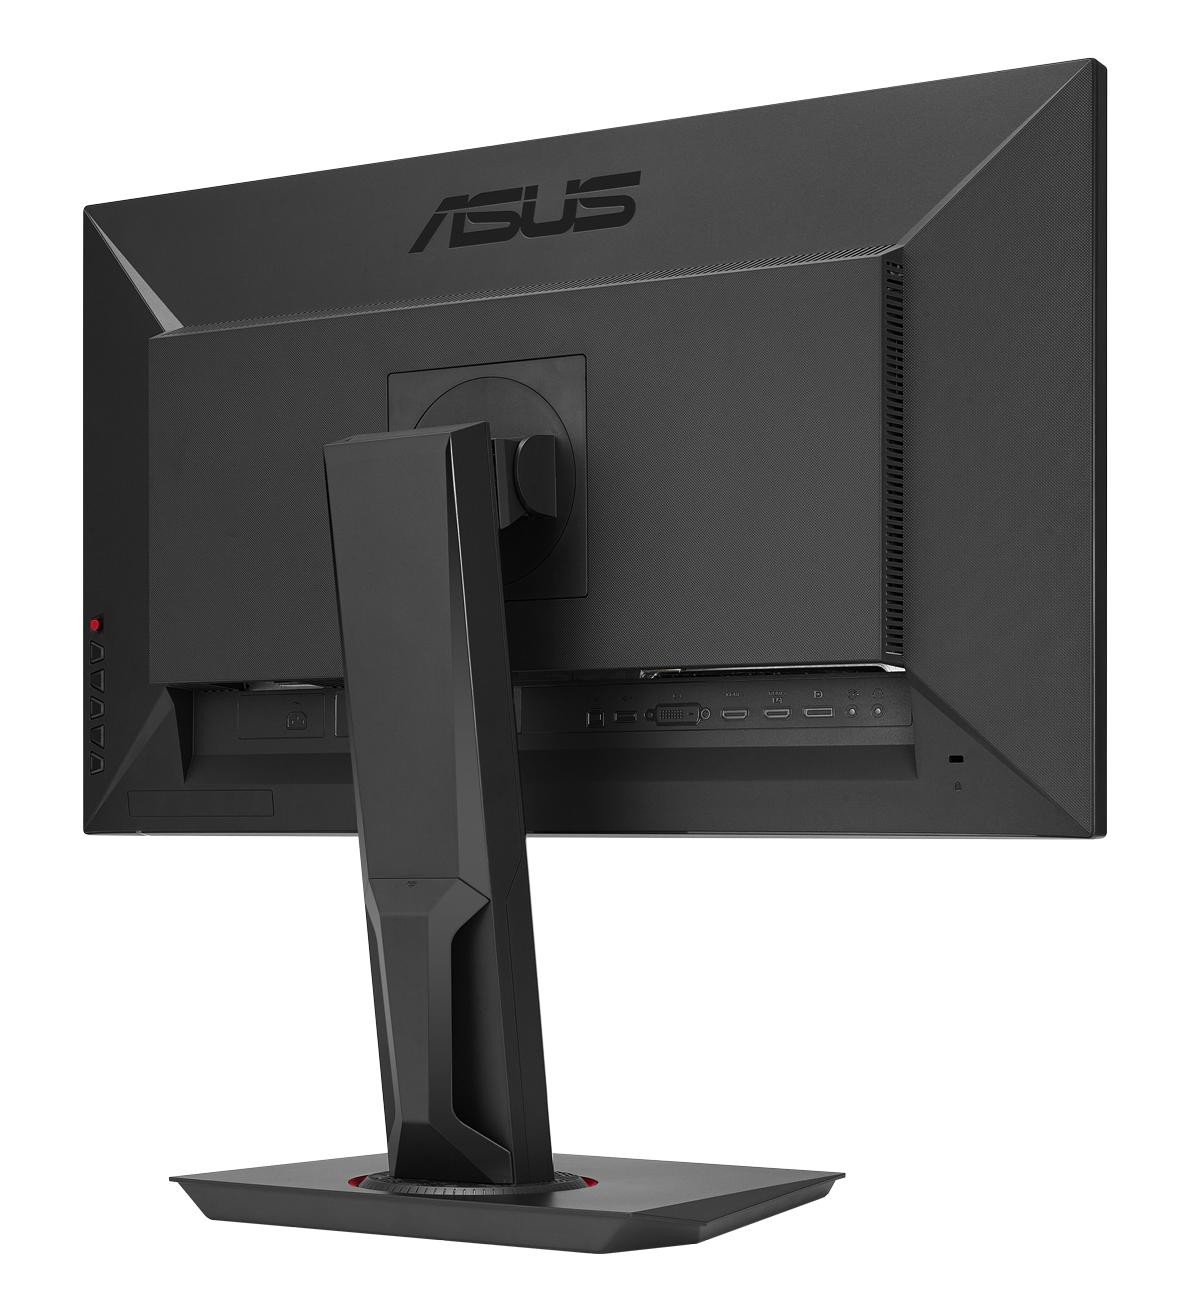 ASUS Announces New 27Inch 144Hz FreeSync Gaming Monitor